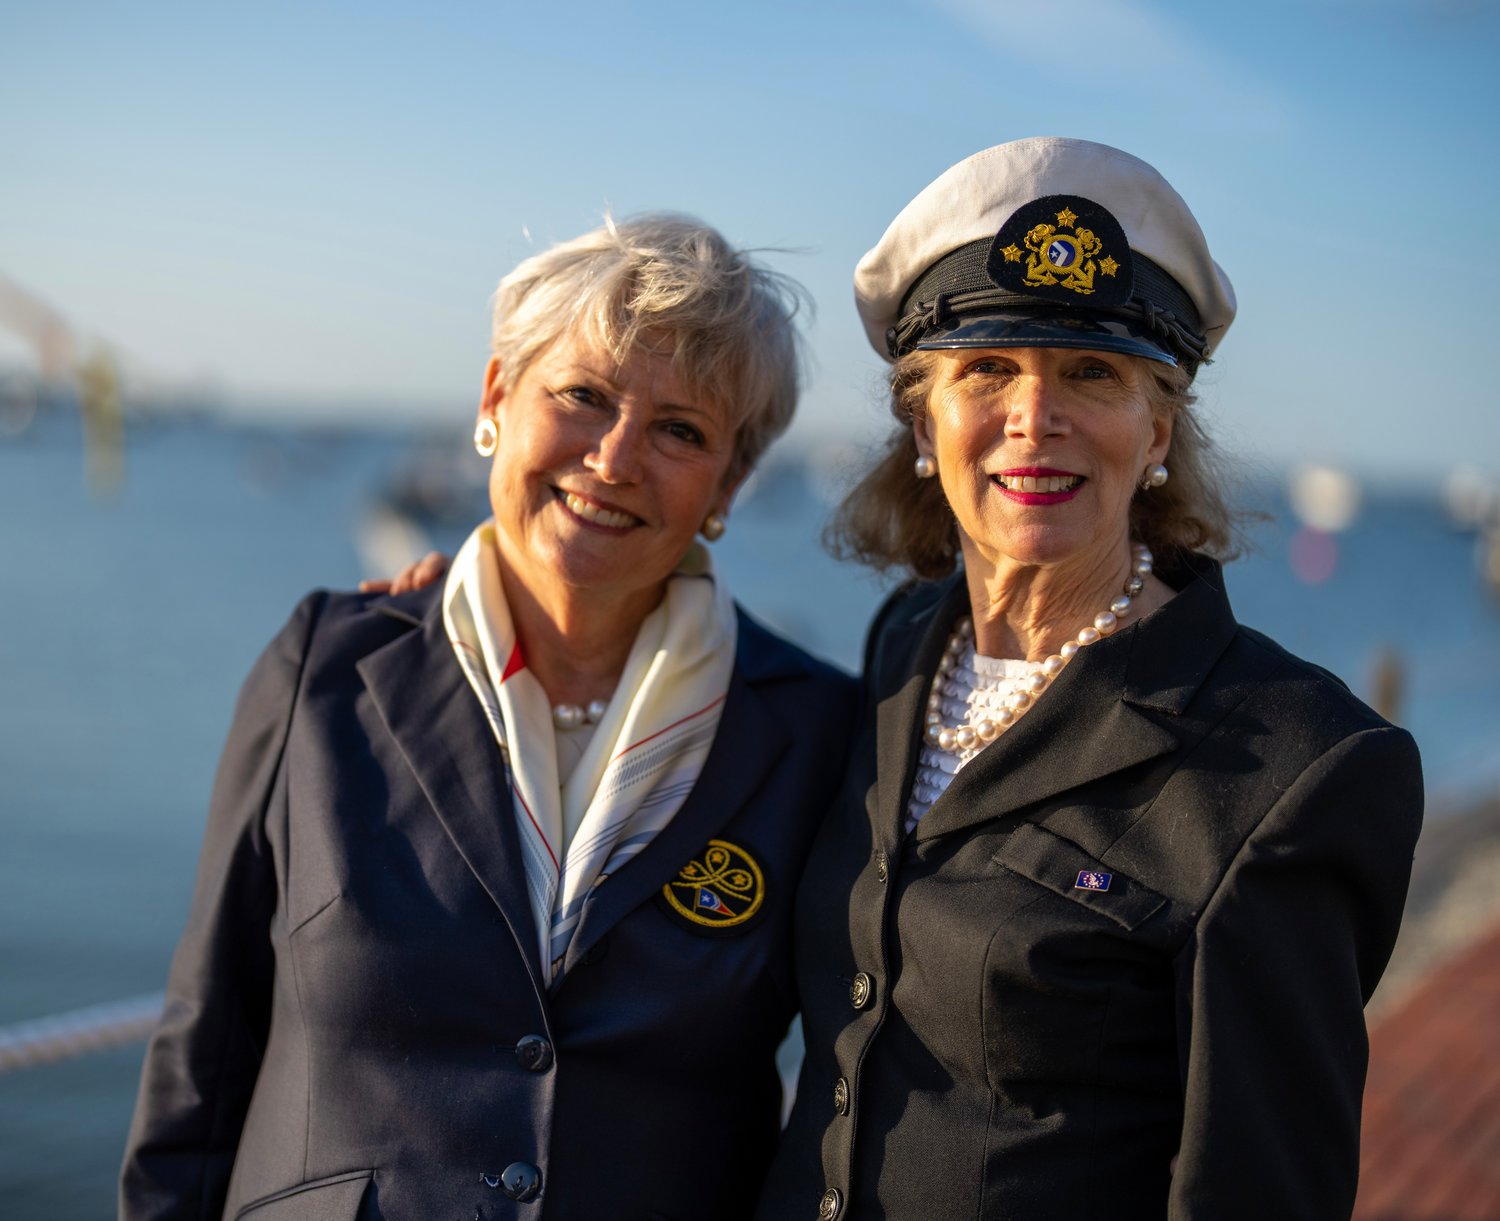 Great Harbor Yacht Club commodore Cece Fowler, left, and Nantucket Yacht Club commodore Lucinda Ballard. This season marks the first time both top positions at the clubs are held by women.